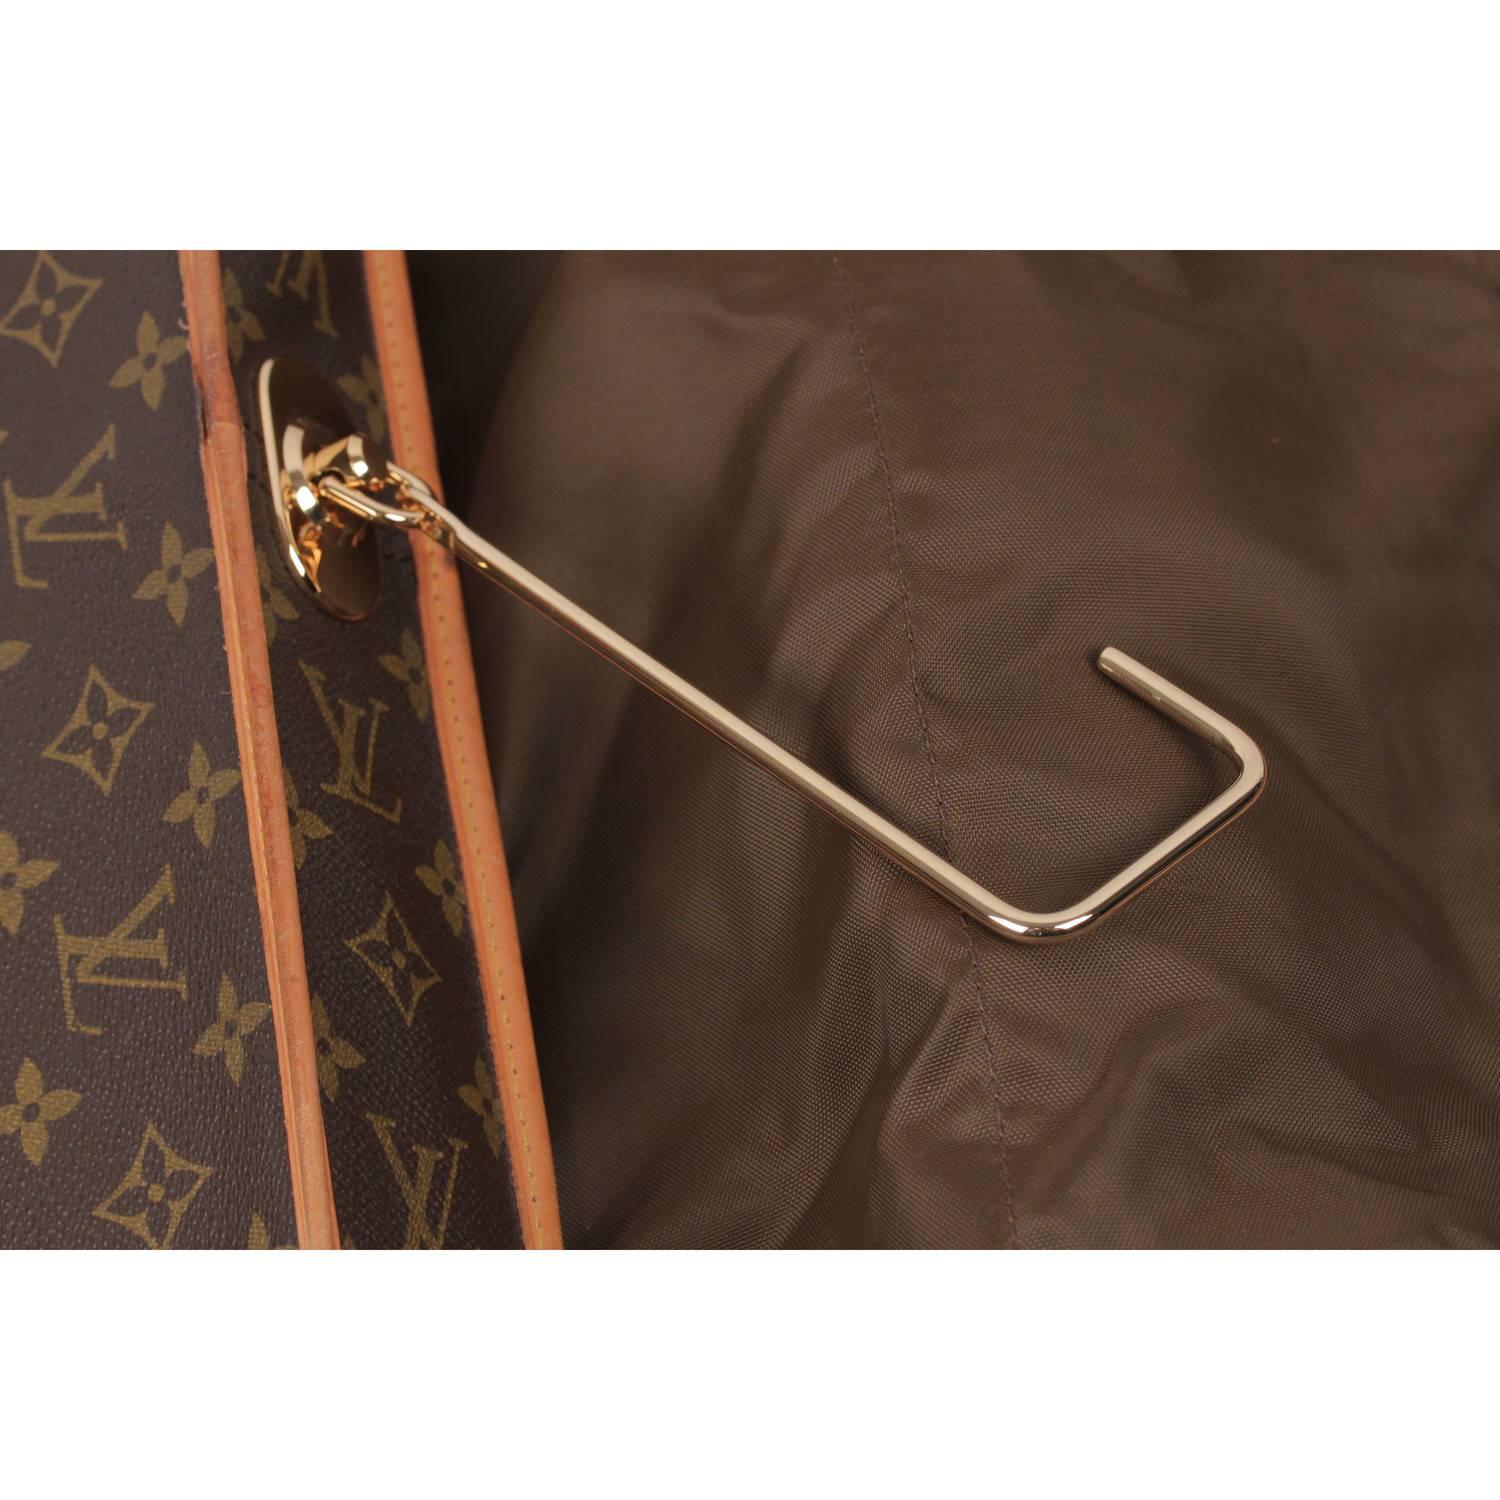 Practical foldable garment bag by LOUIS VUITTON in classic monogram canvas with a very functional interior. Ideally suited for men or women, this bag features a ample space for clothes, shoes and accessories. It has a pivoting exterior hanger that